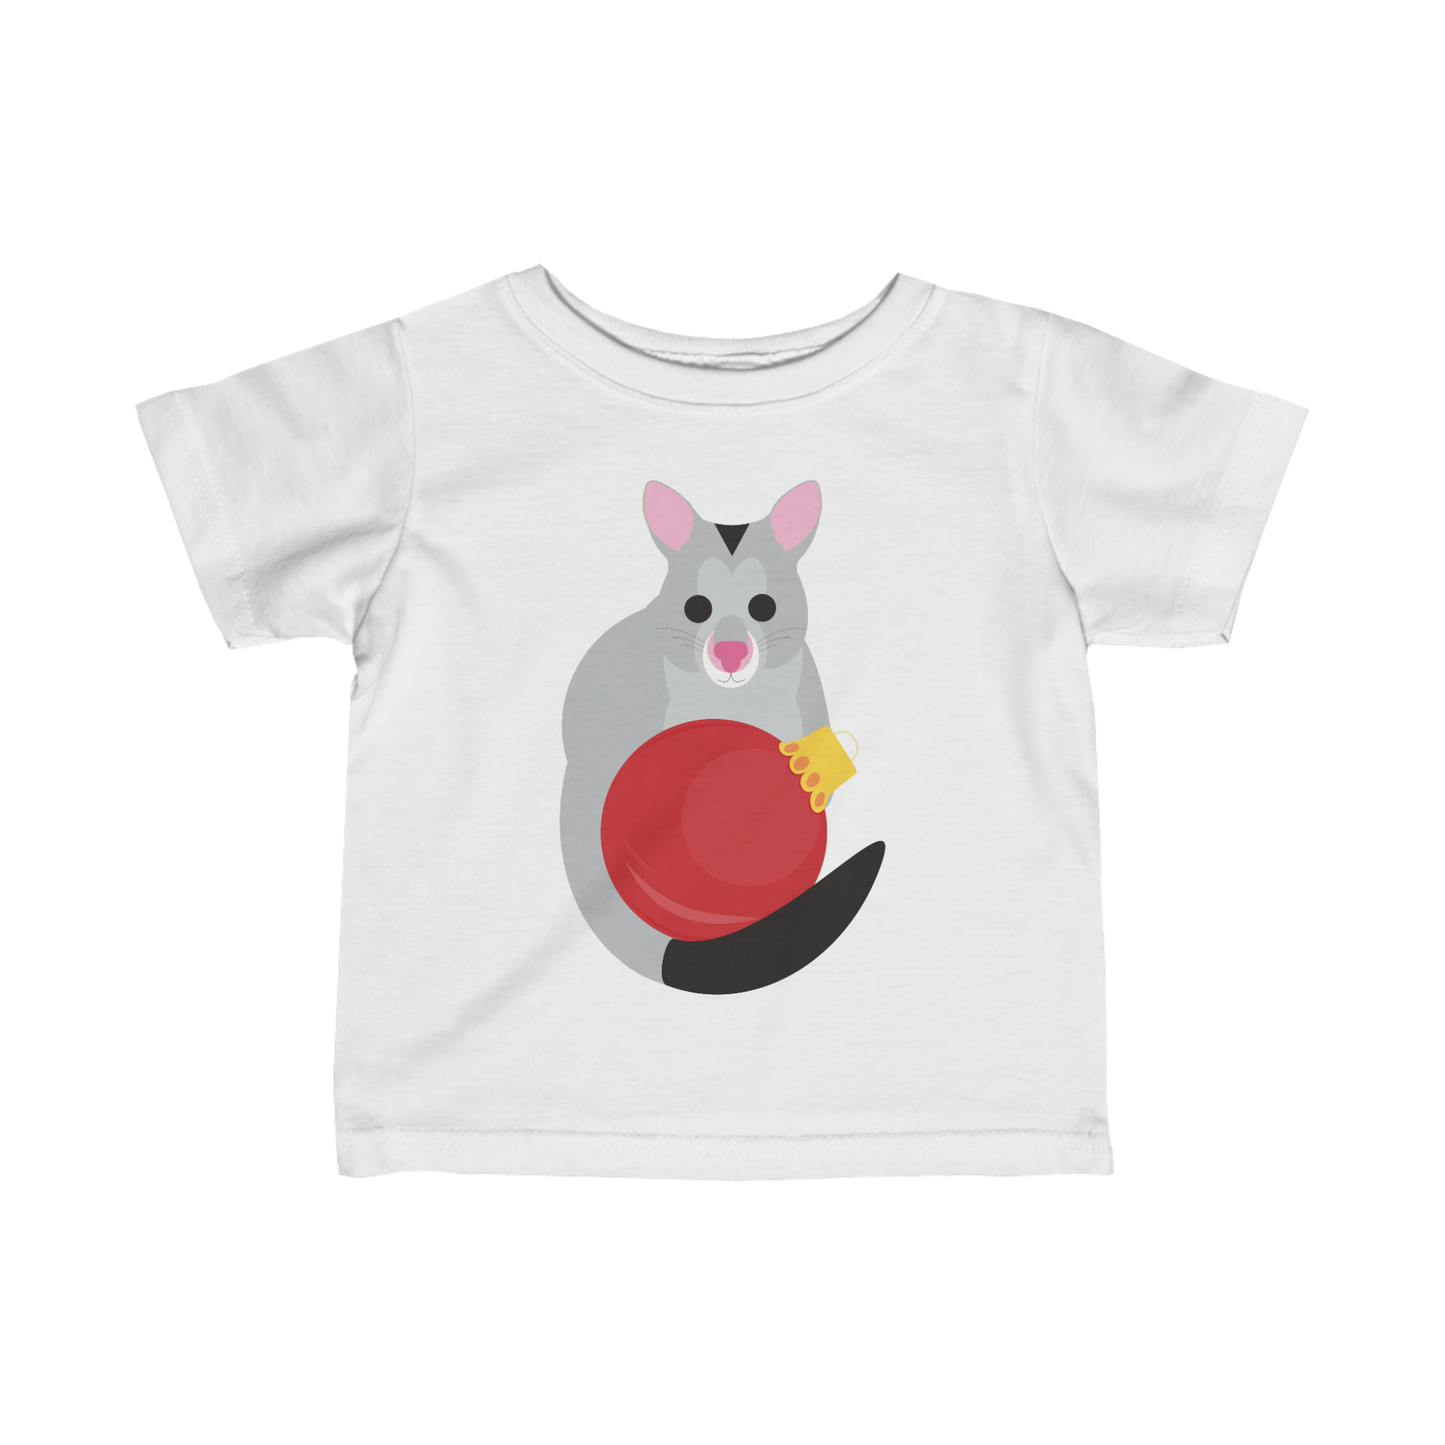 adorable white t-shirt featuring a possum with a Christmas bauble